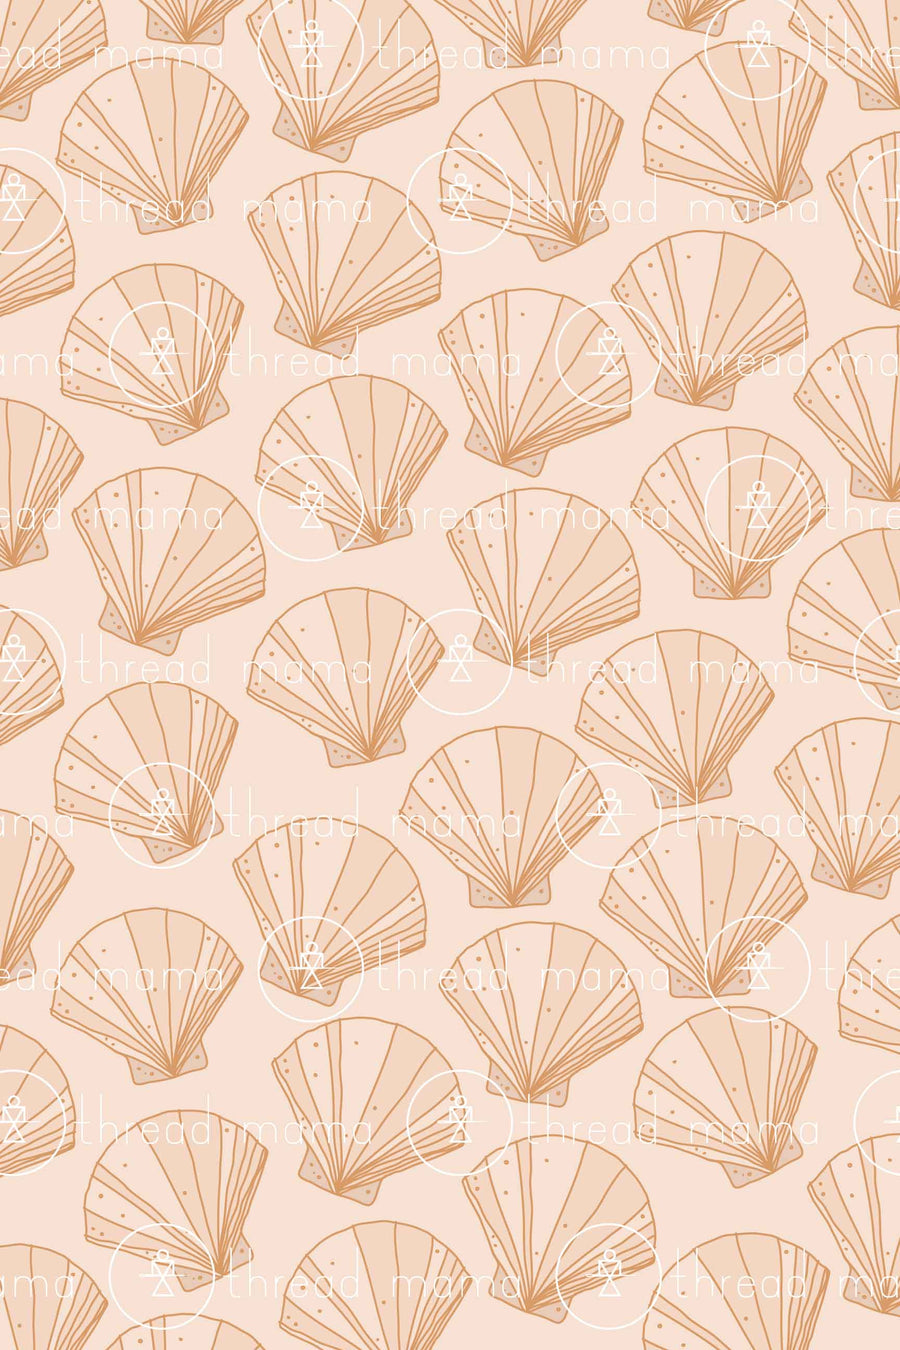 Background Pattern #14 (Printable Poster)